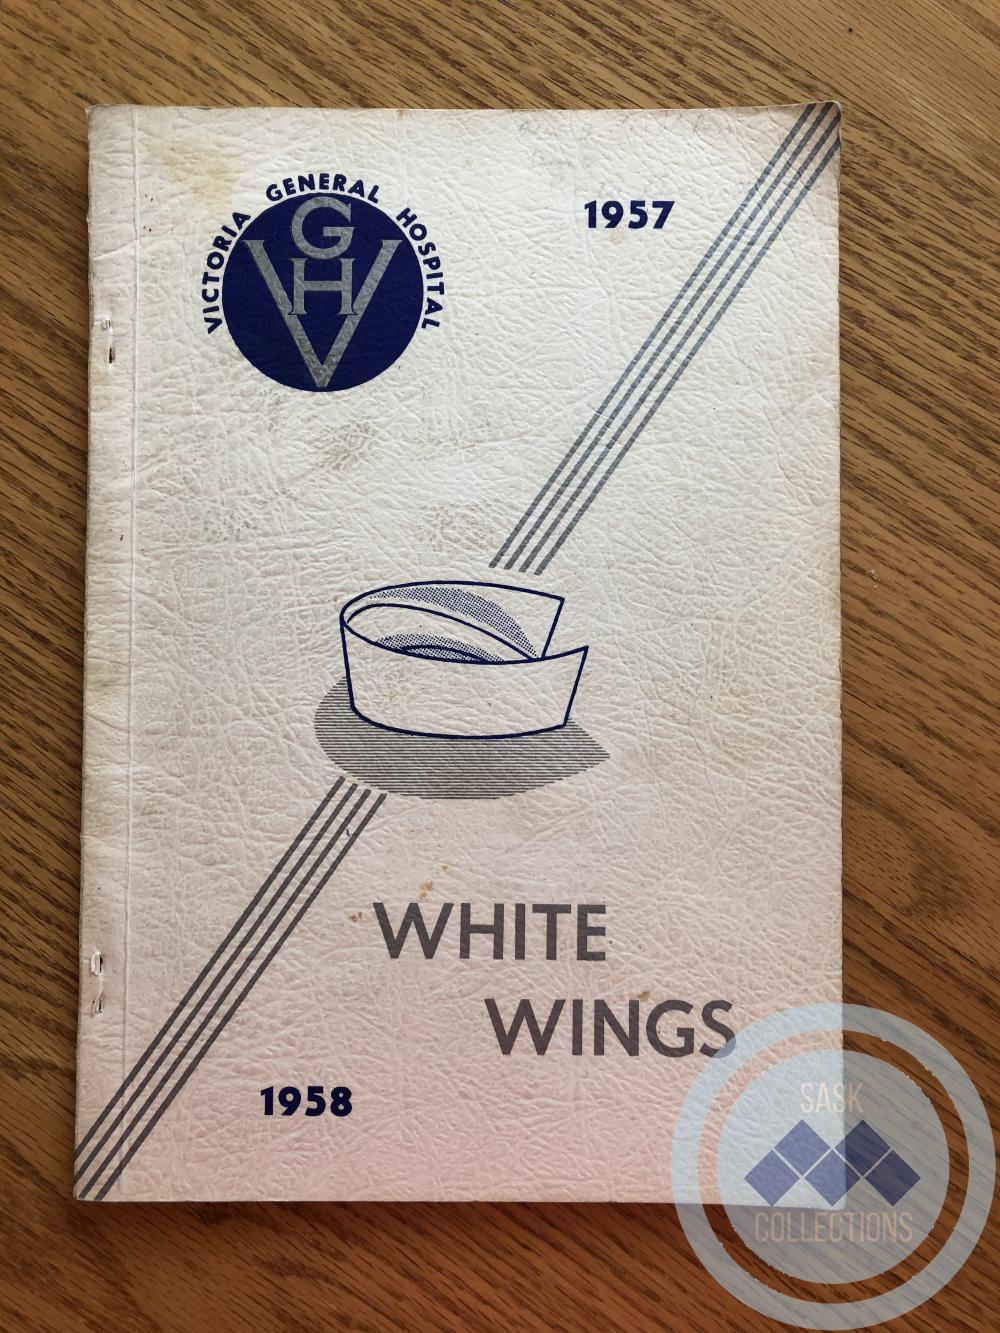 Yearbook - White Wings - Victoria General Hospital 1957 1958